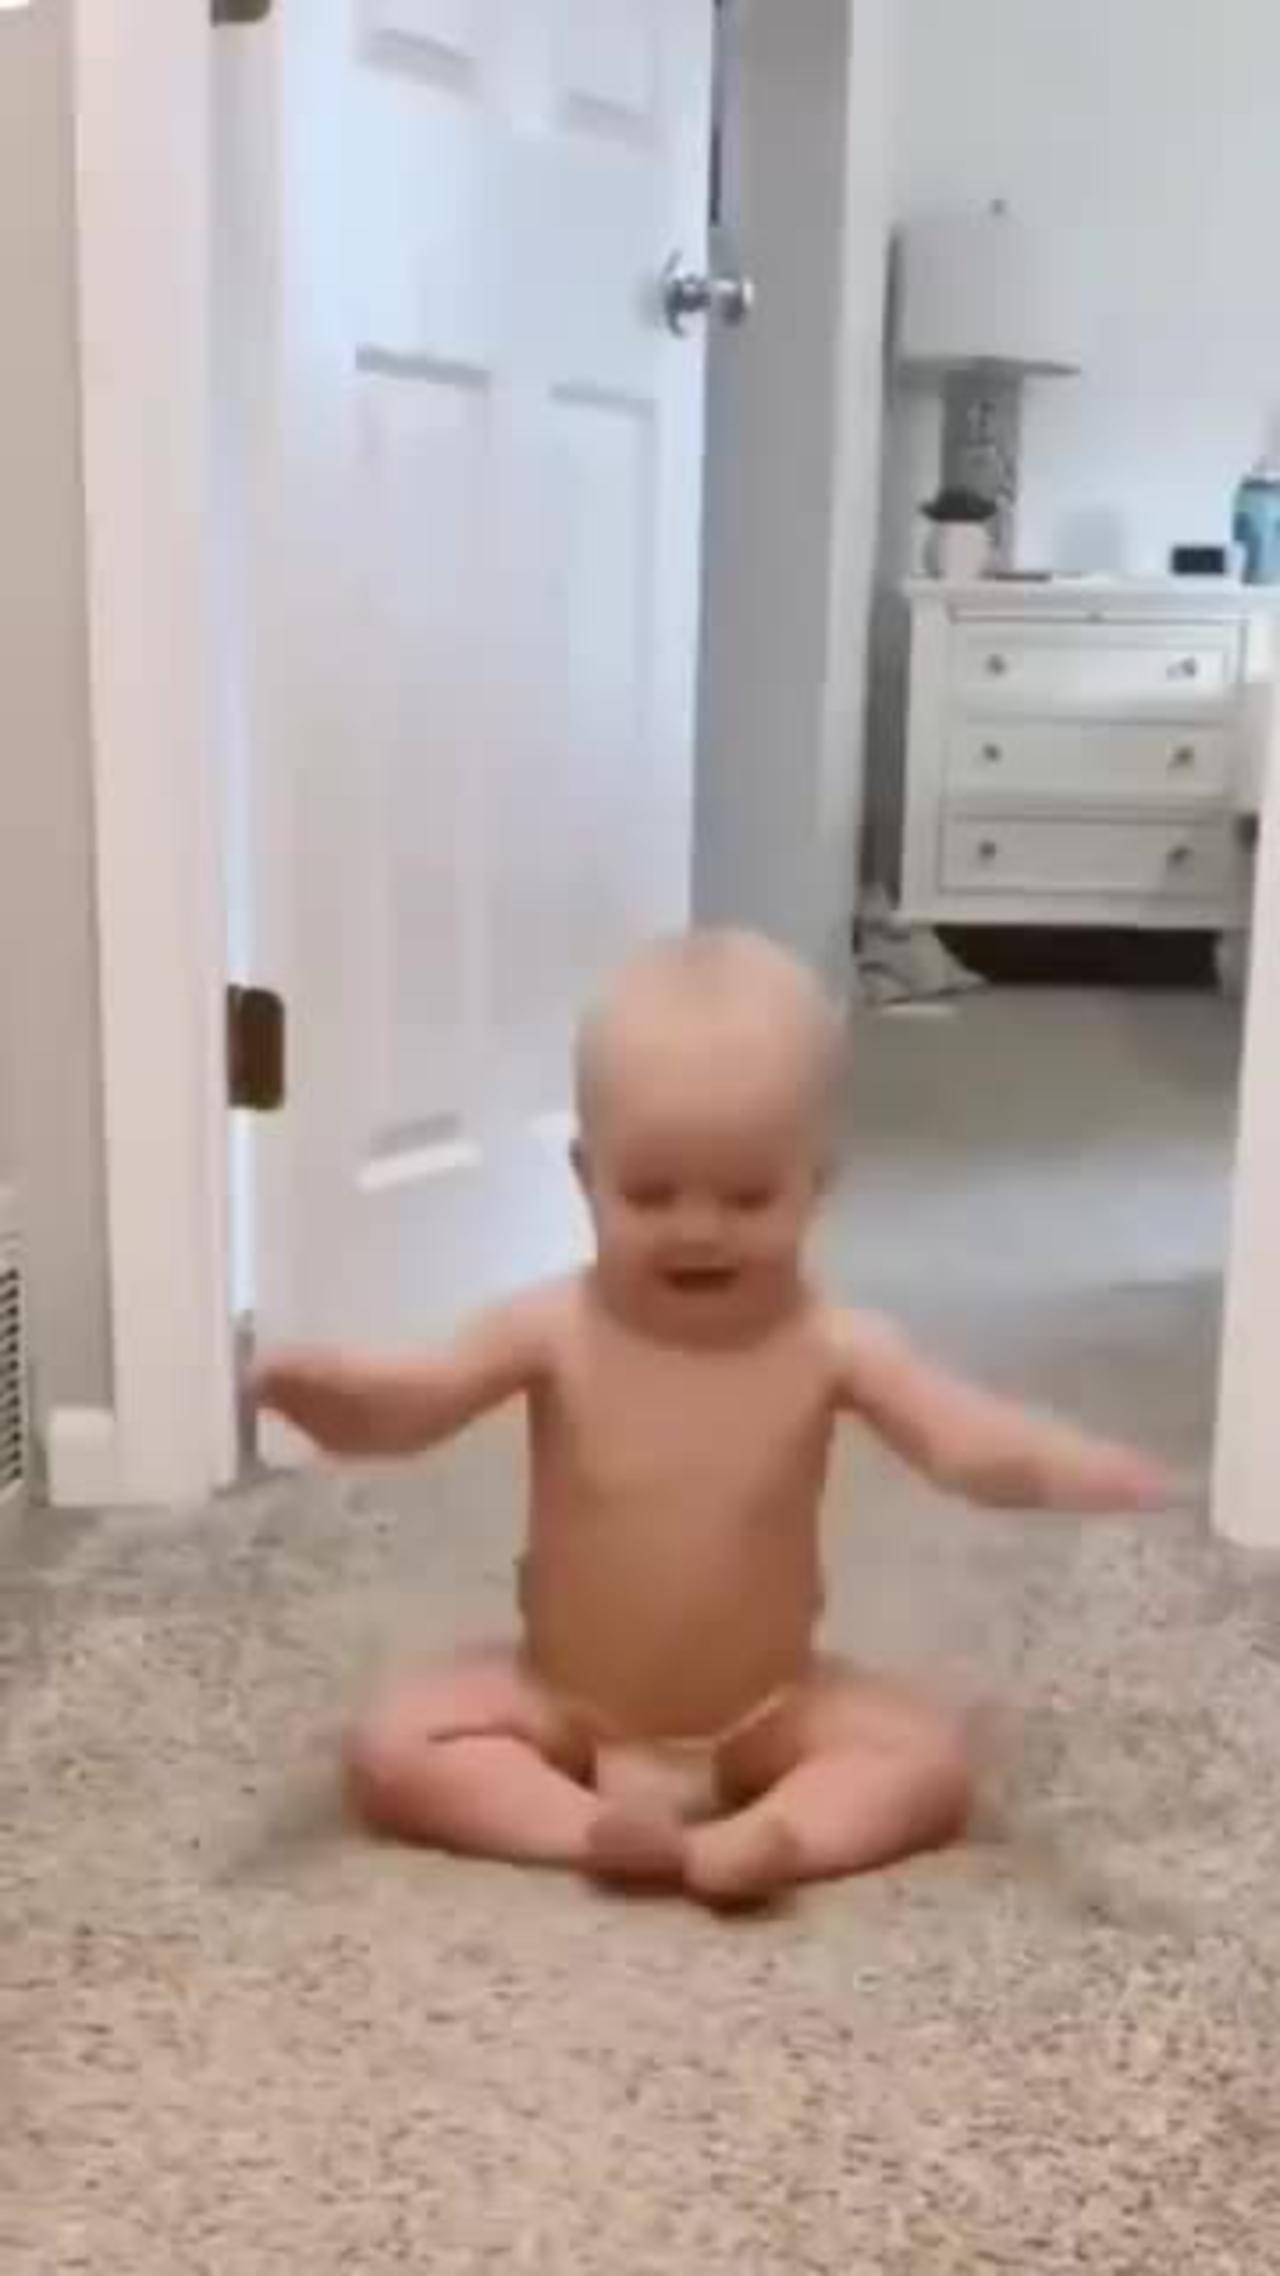 Baby Funny video 🤣🤣🤣